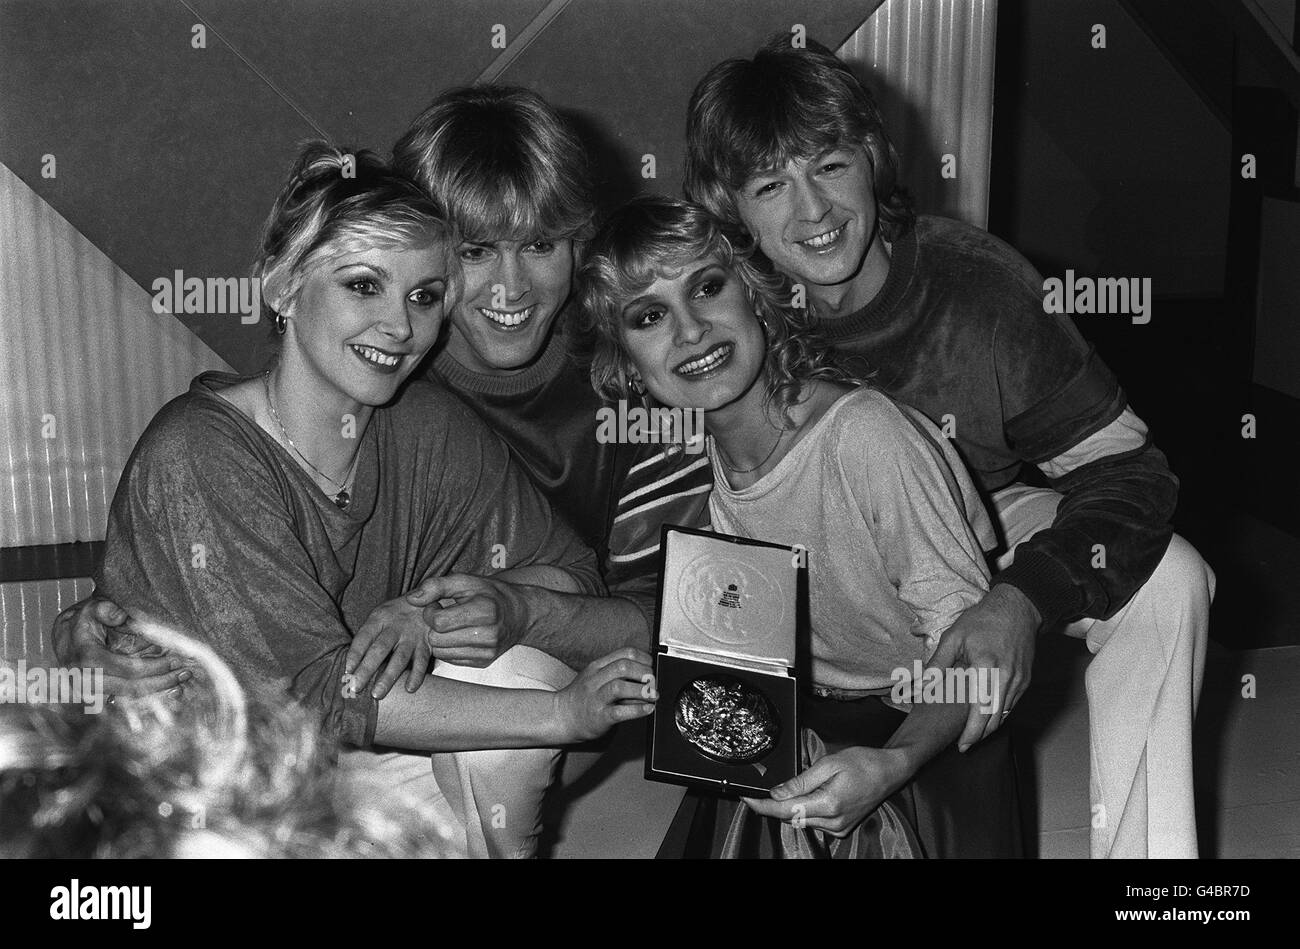 PA NEWS PHOTO 11/3/81 POP GROUP 'BUCKS FIZZ' IN LONDON. THEY WON THE 'SONG FOR EUROPE' CONTEST. FROM LEFT TO RIGHT: MICHAEL NOLAN (26), BOBBY G (27), AND FRONT ROW: CHERYL BAKER (26) AND JAY ASTON (19) Stock Photo